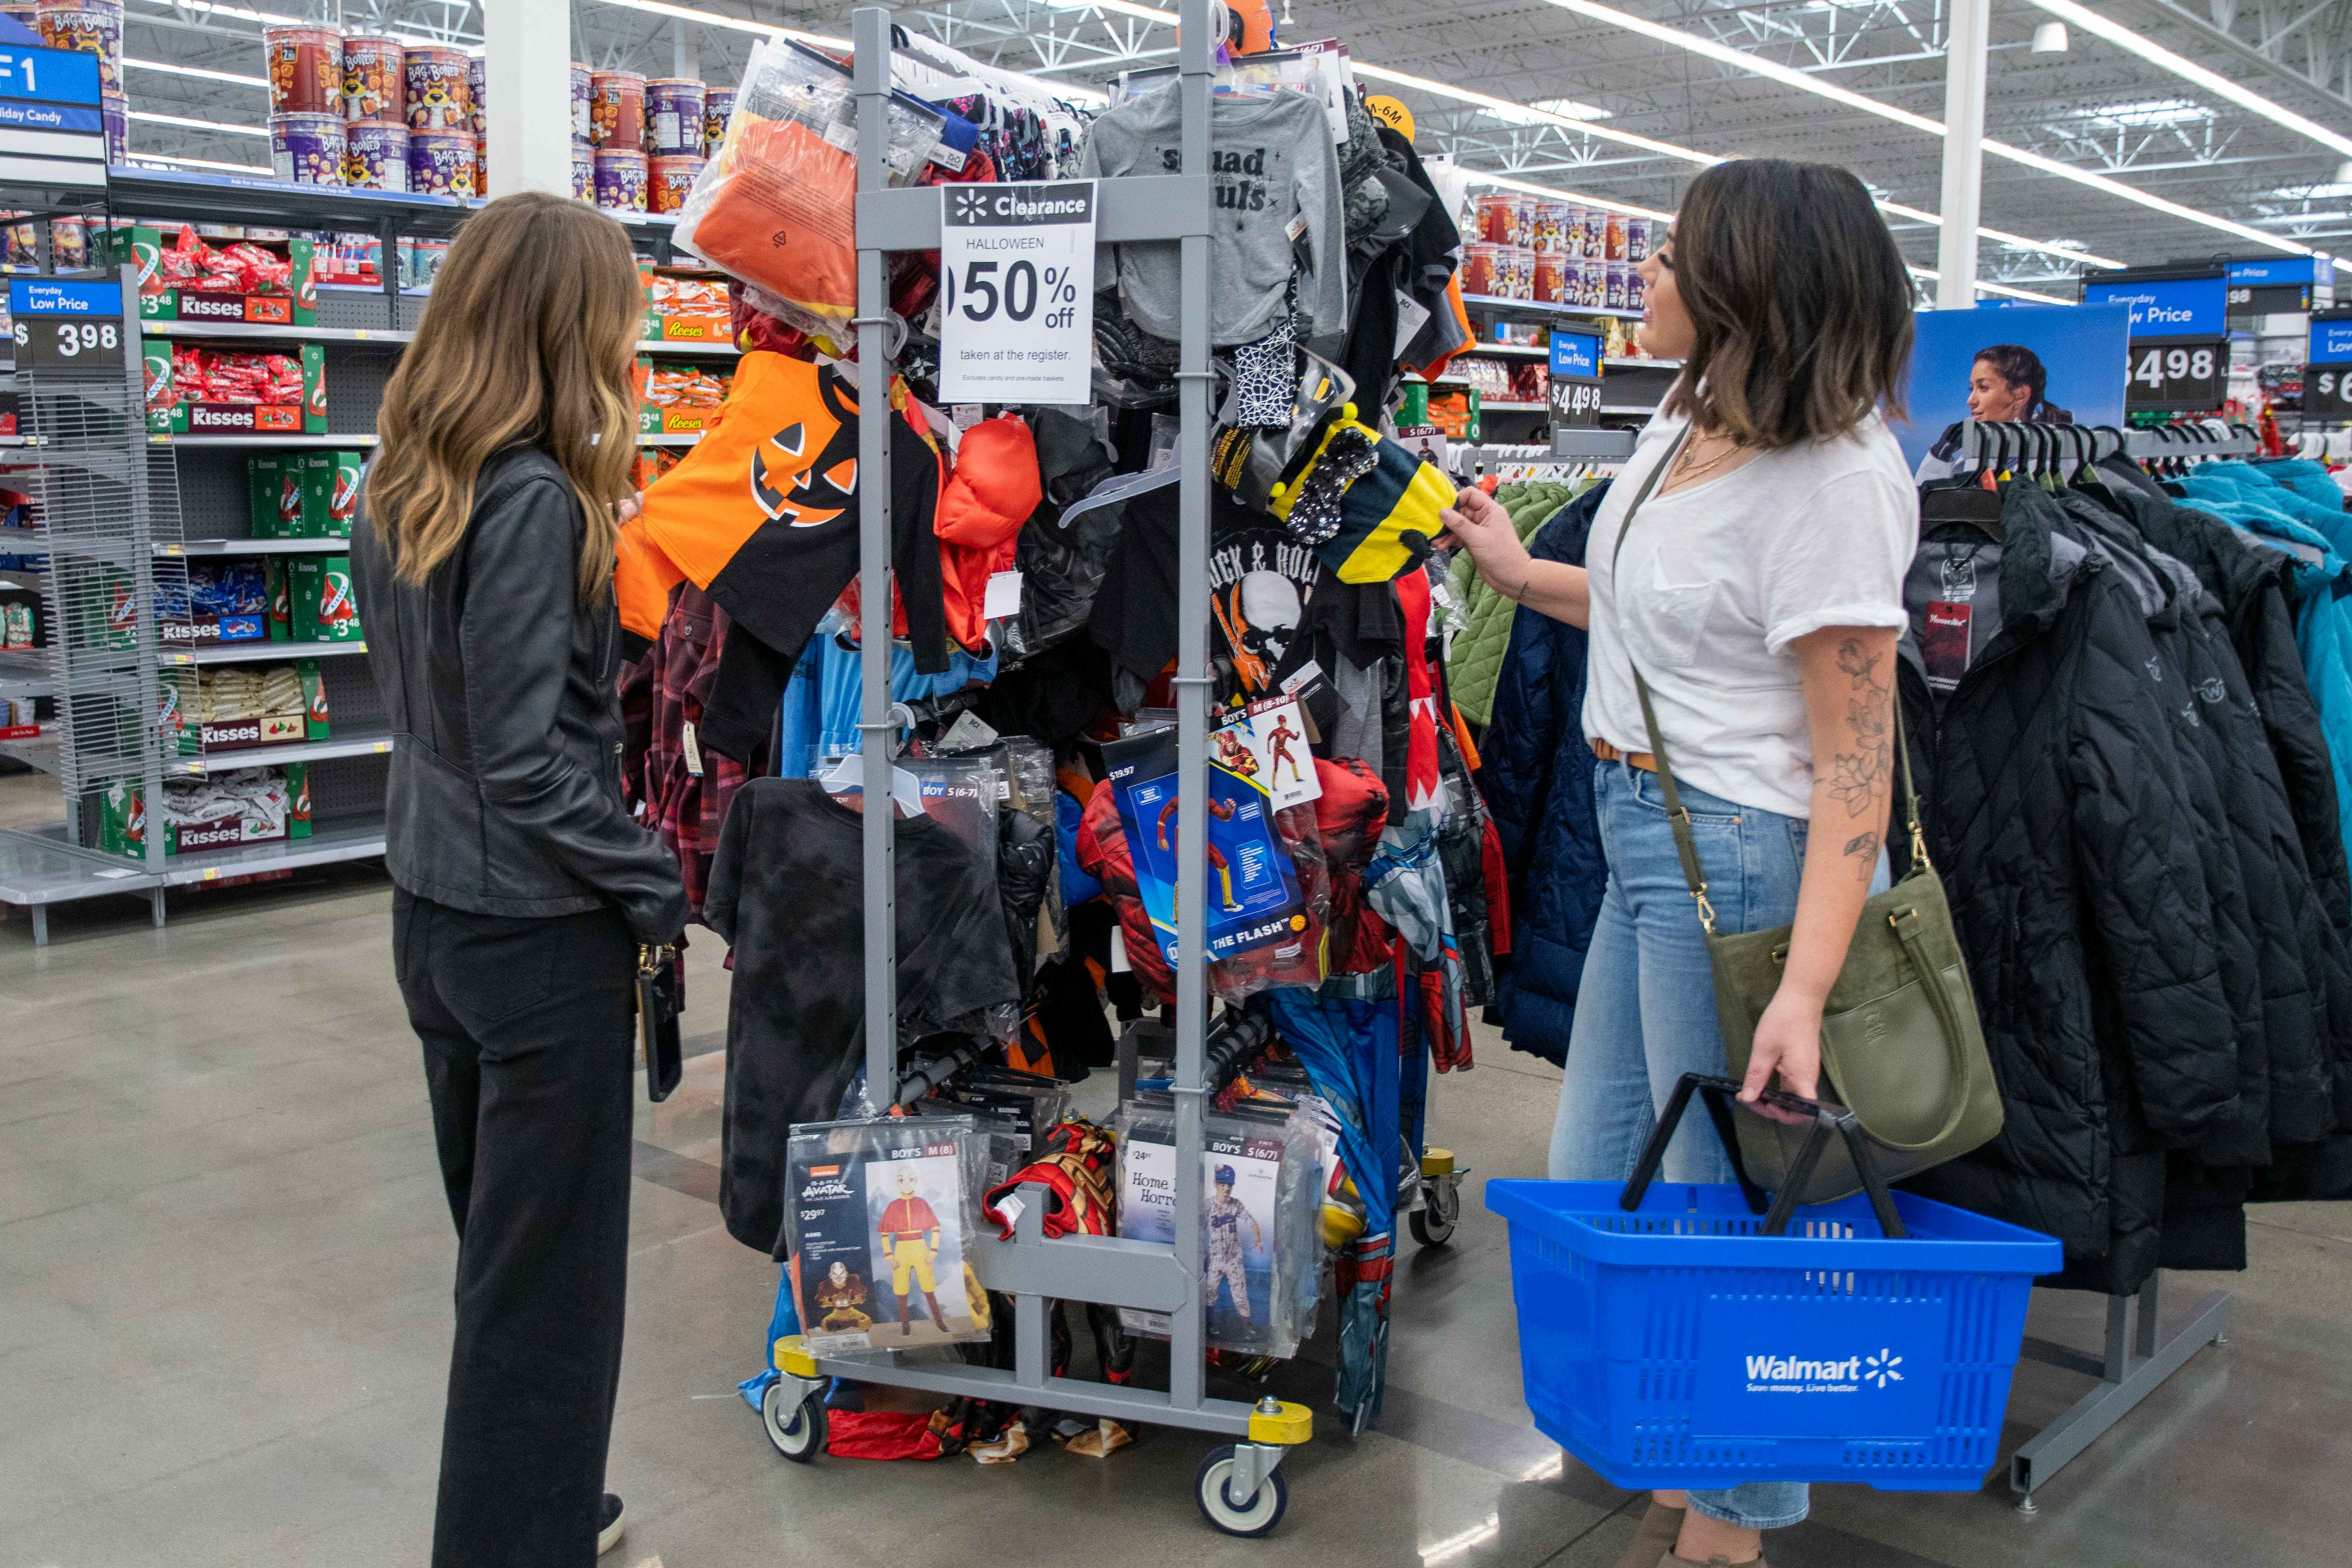 Check Out Last-Minute Halloween Deals at Walmart, Target and More - CNET